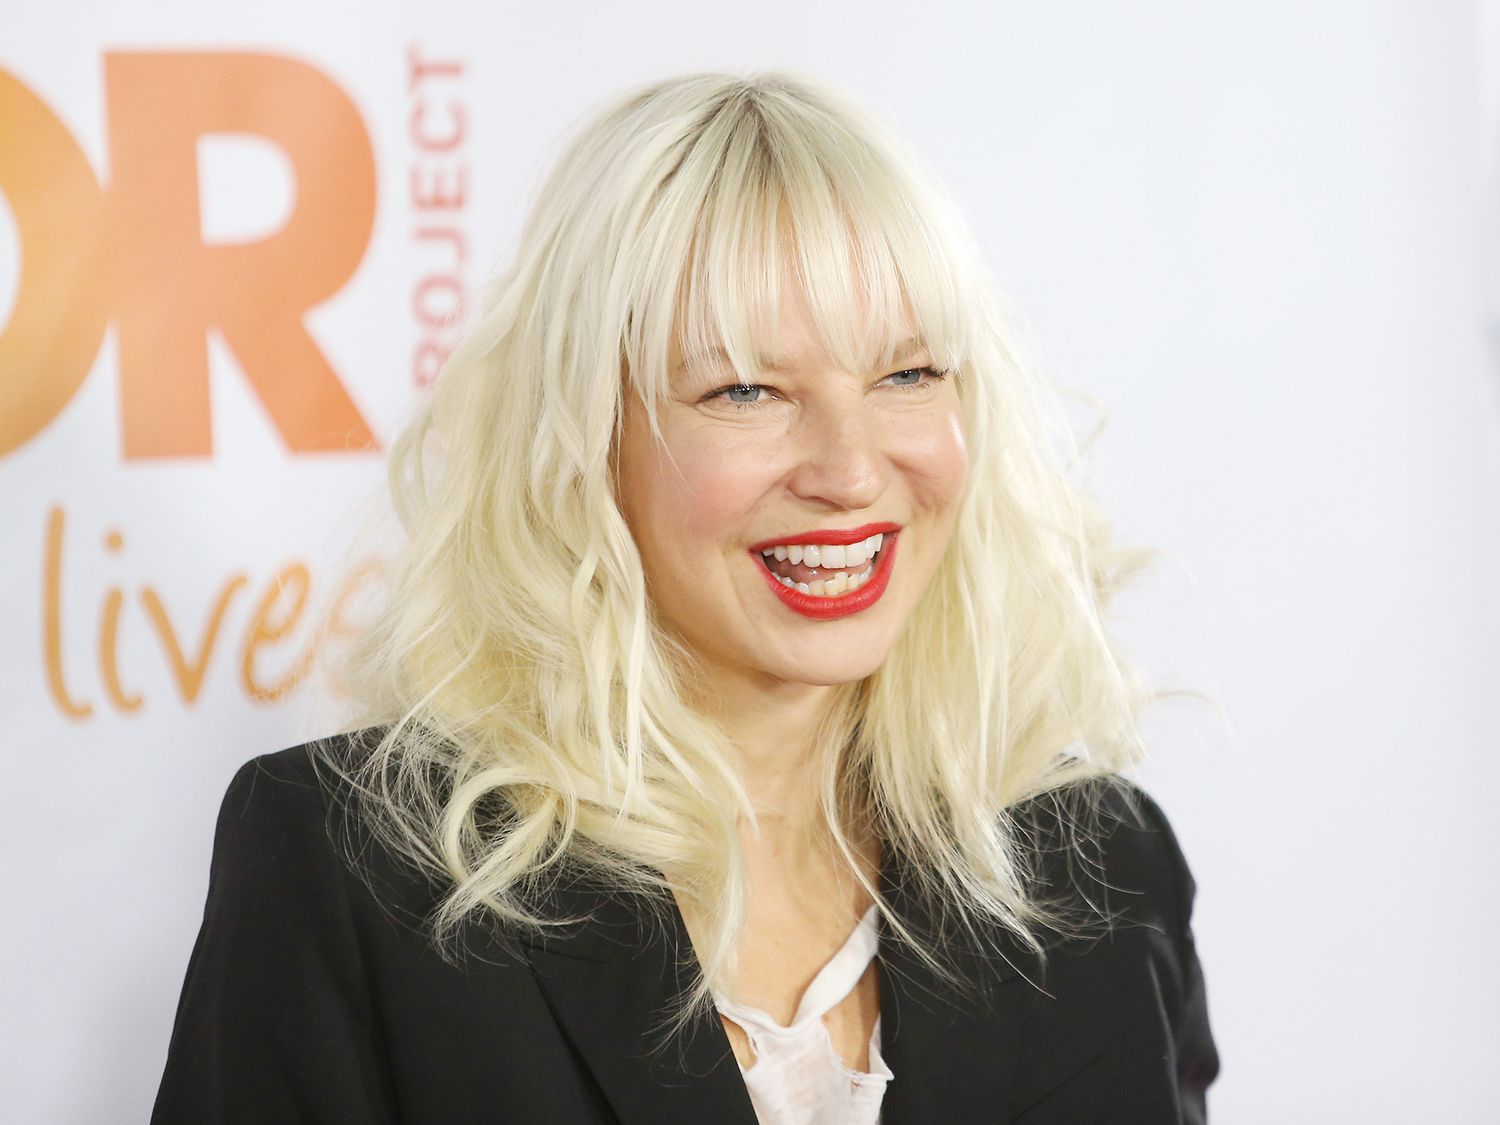 Who Is Sia, The Singer?